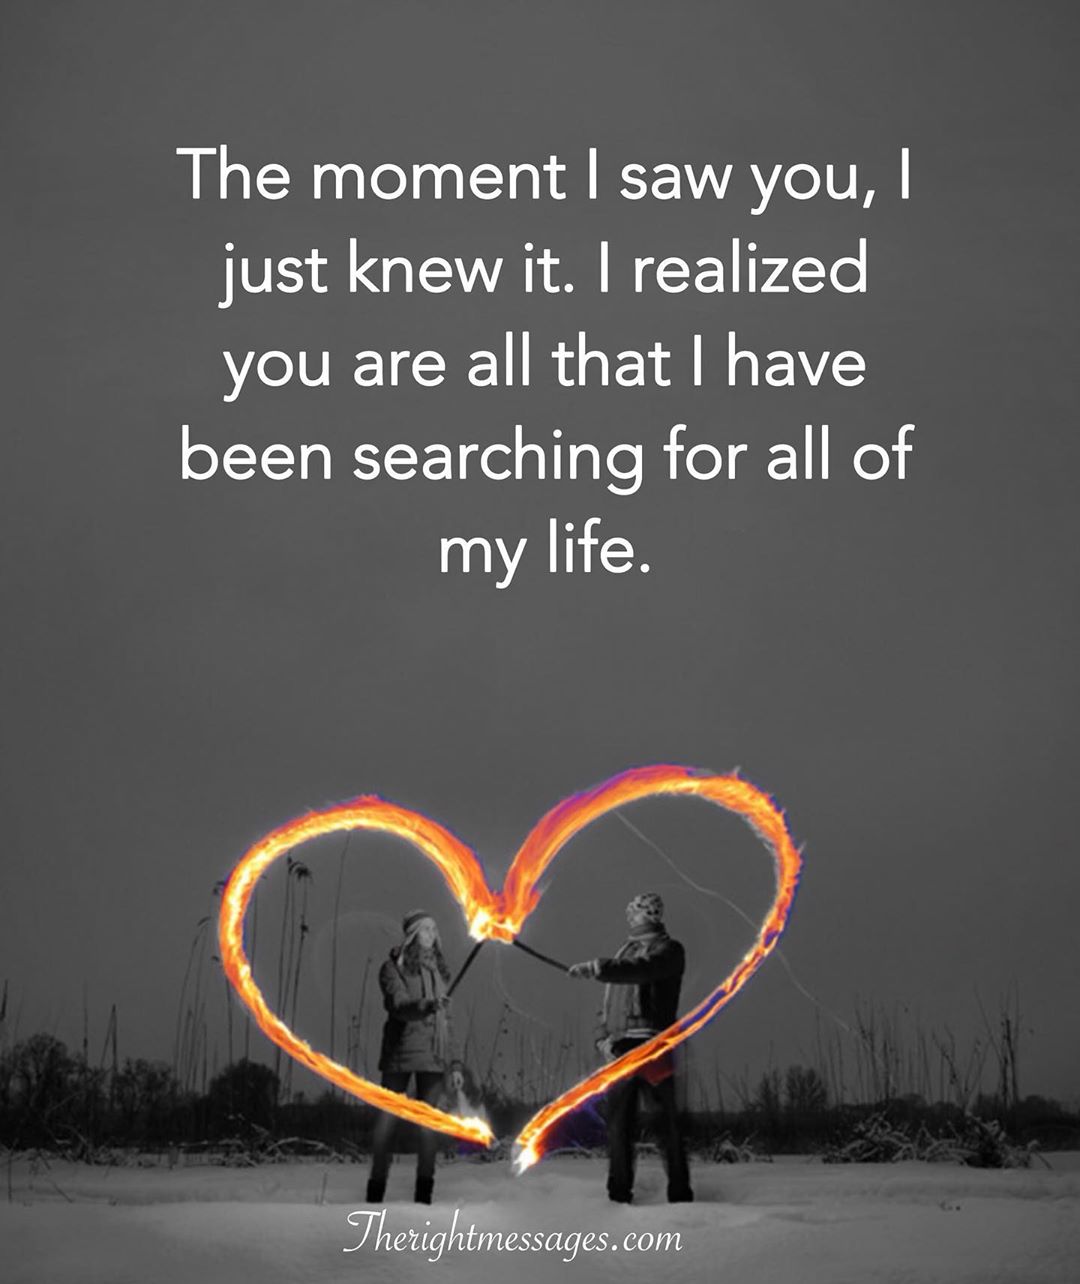 20 Best Love Quotes for Her and Him Romantic Ways to Say 'I Love. 